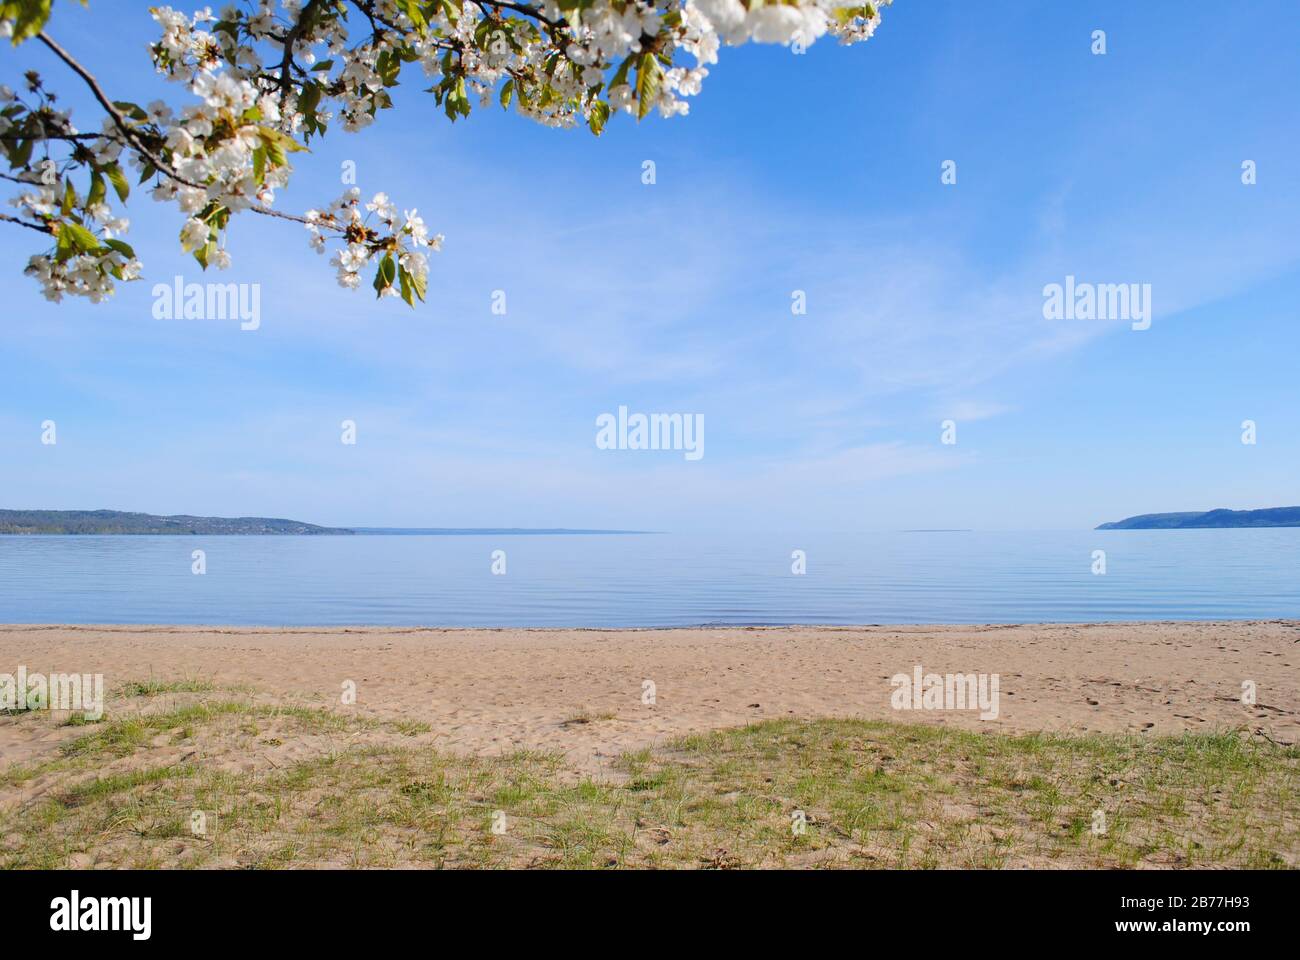 Springtime. Sunny day. Blooming tree and view of lake Vättern from Vätterstranden in Jönköping, Sweden. Stock Photo